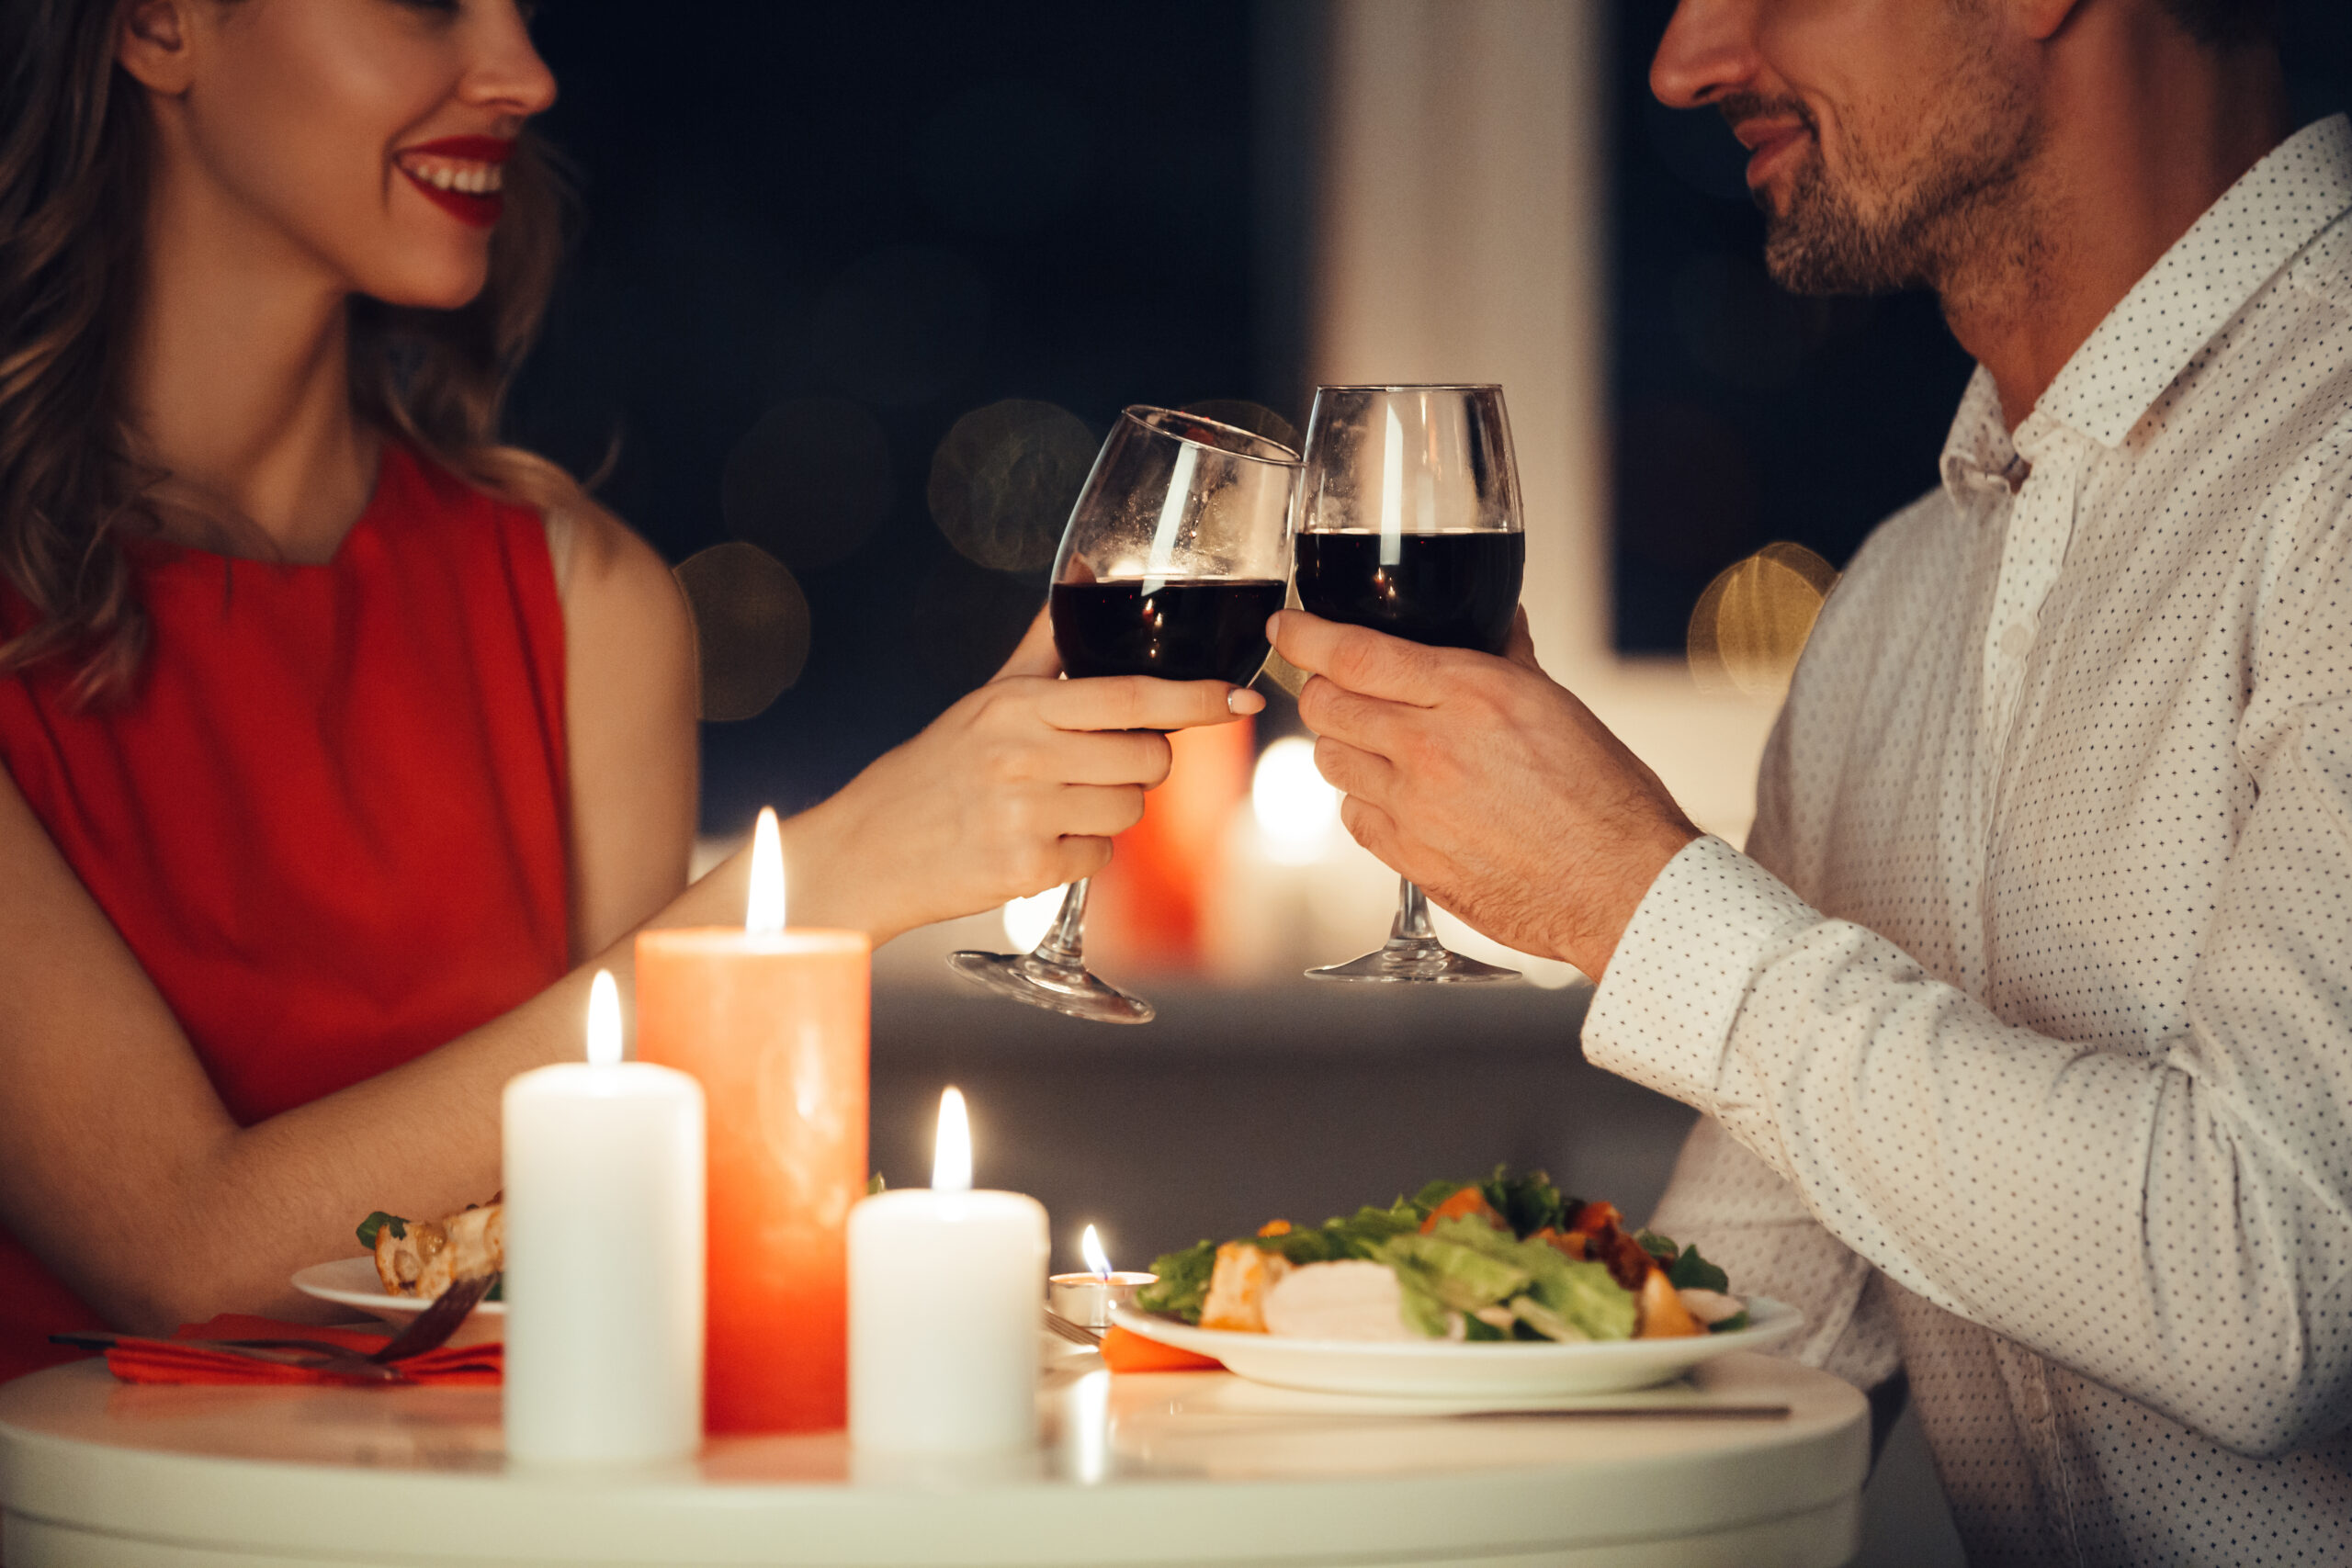 BON Appetits | Valentine’s Day Dinner at Queen’s Hotel by BON Hotels | R250 per person / R500 per couple